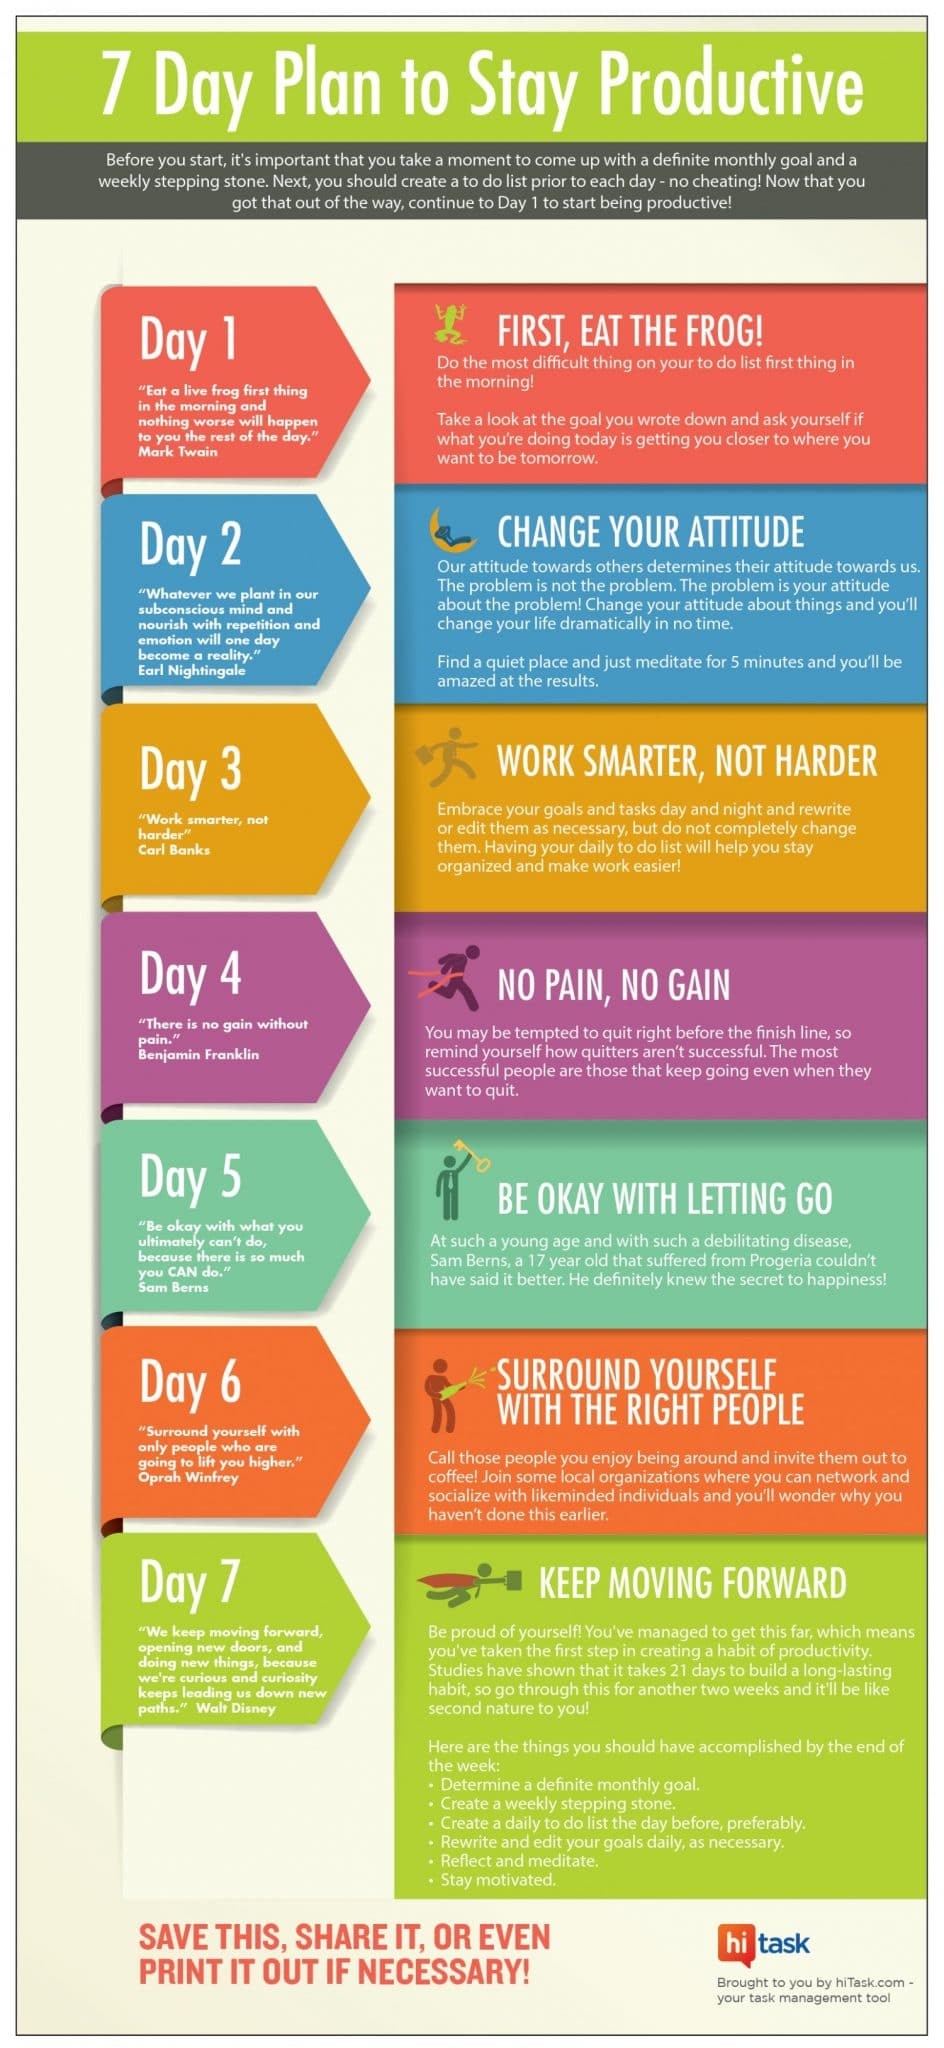 7 Day plan to stay productive